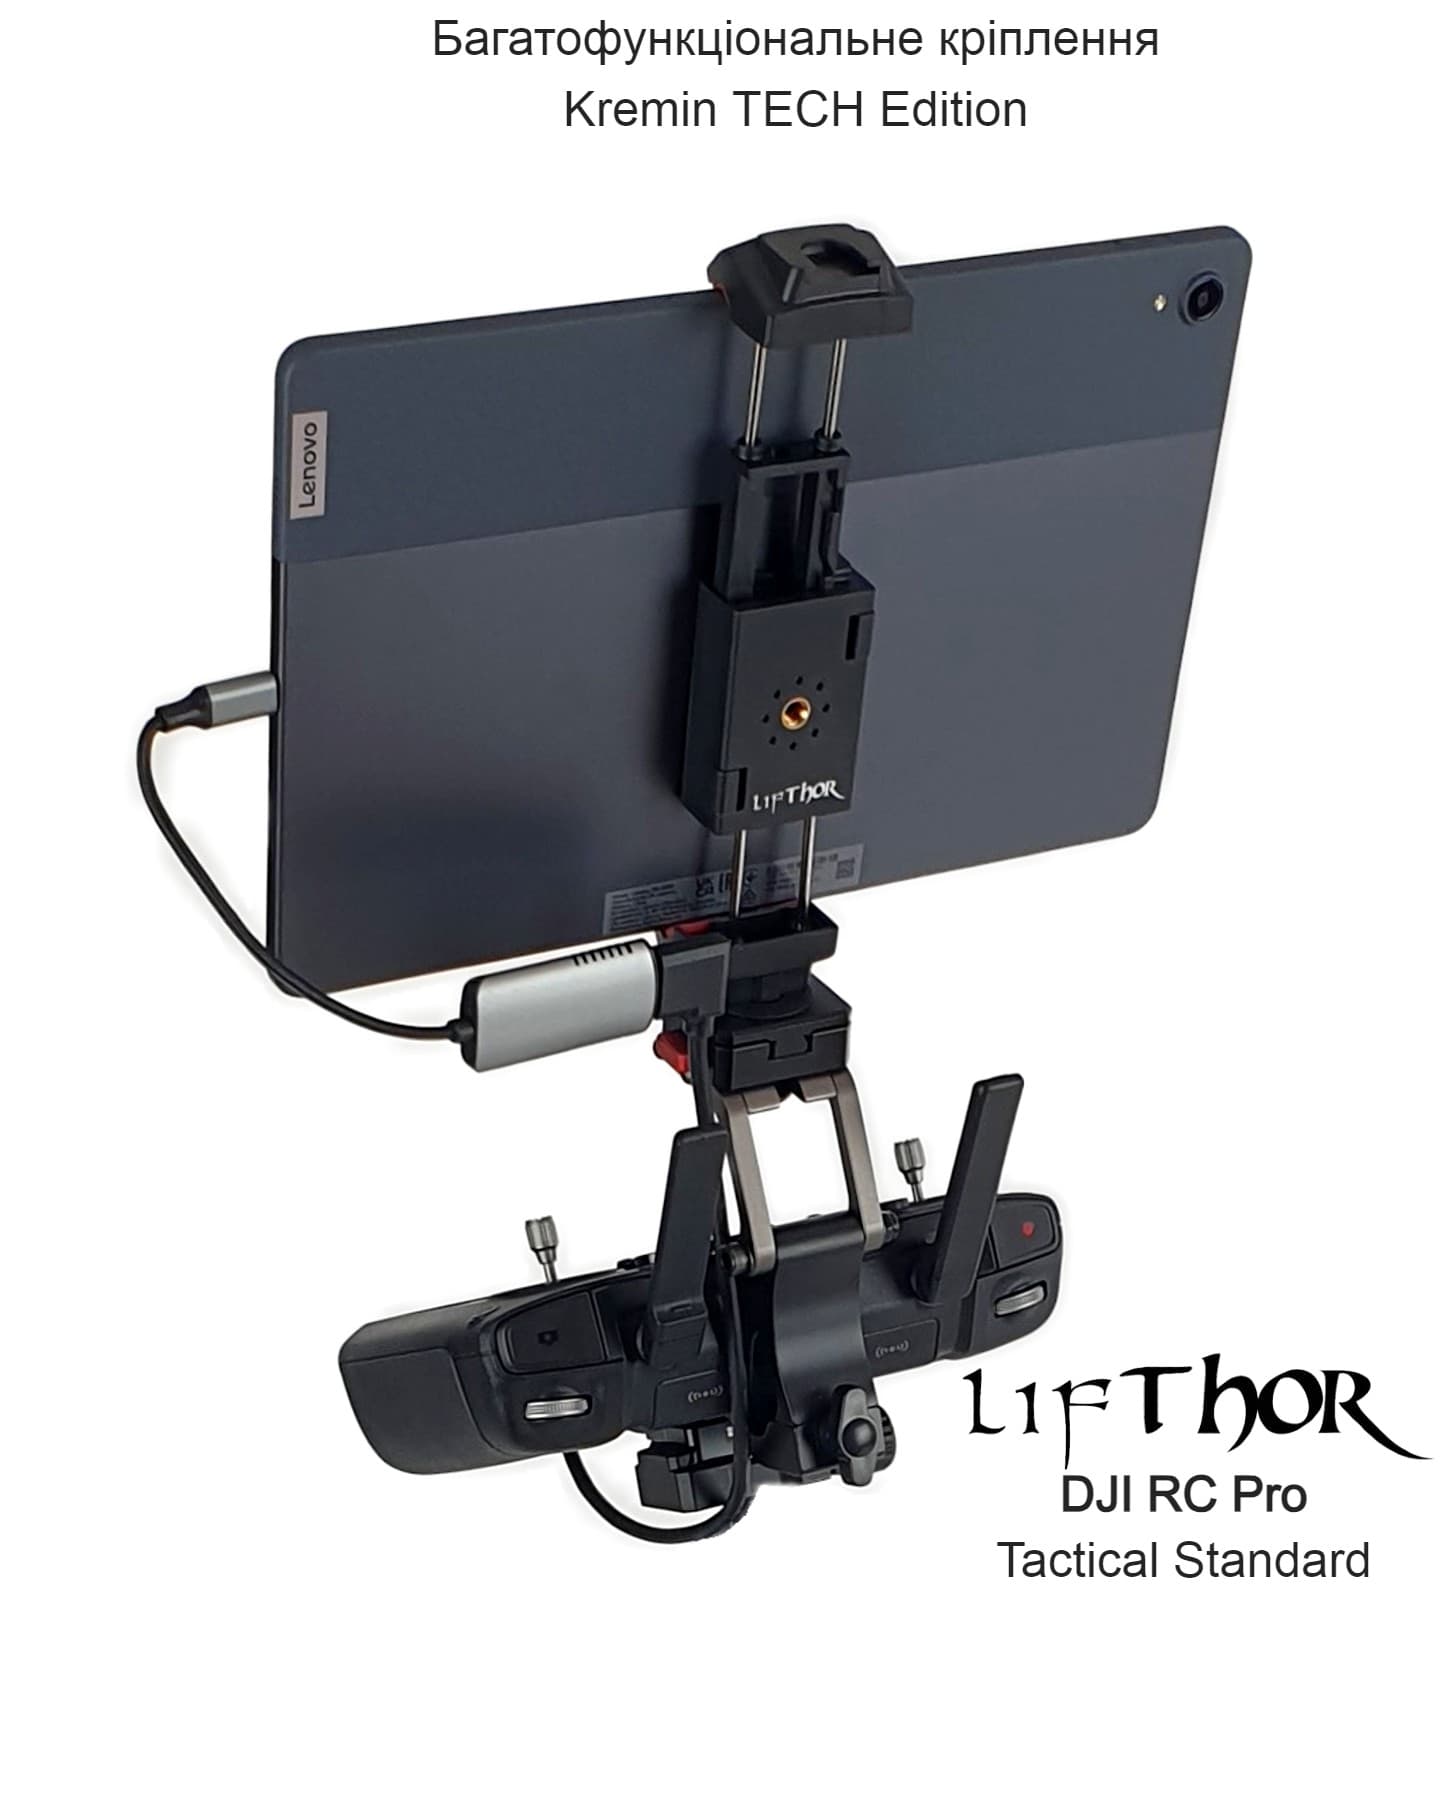 LifThor RC Pro for DJI RC Pro